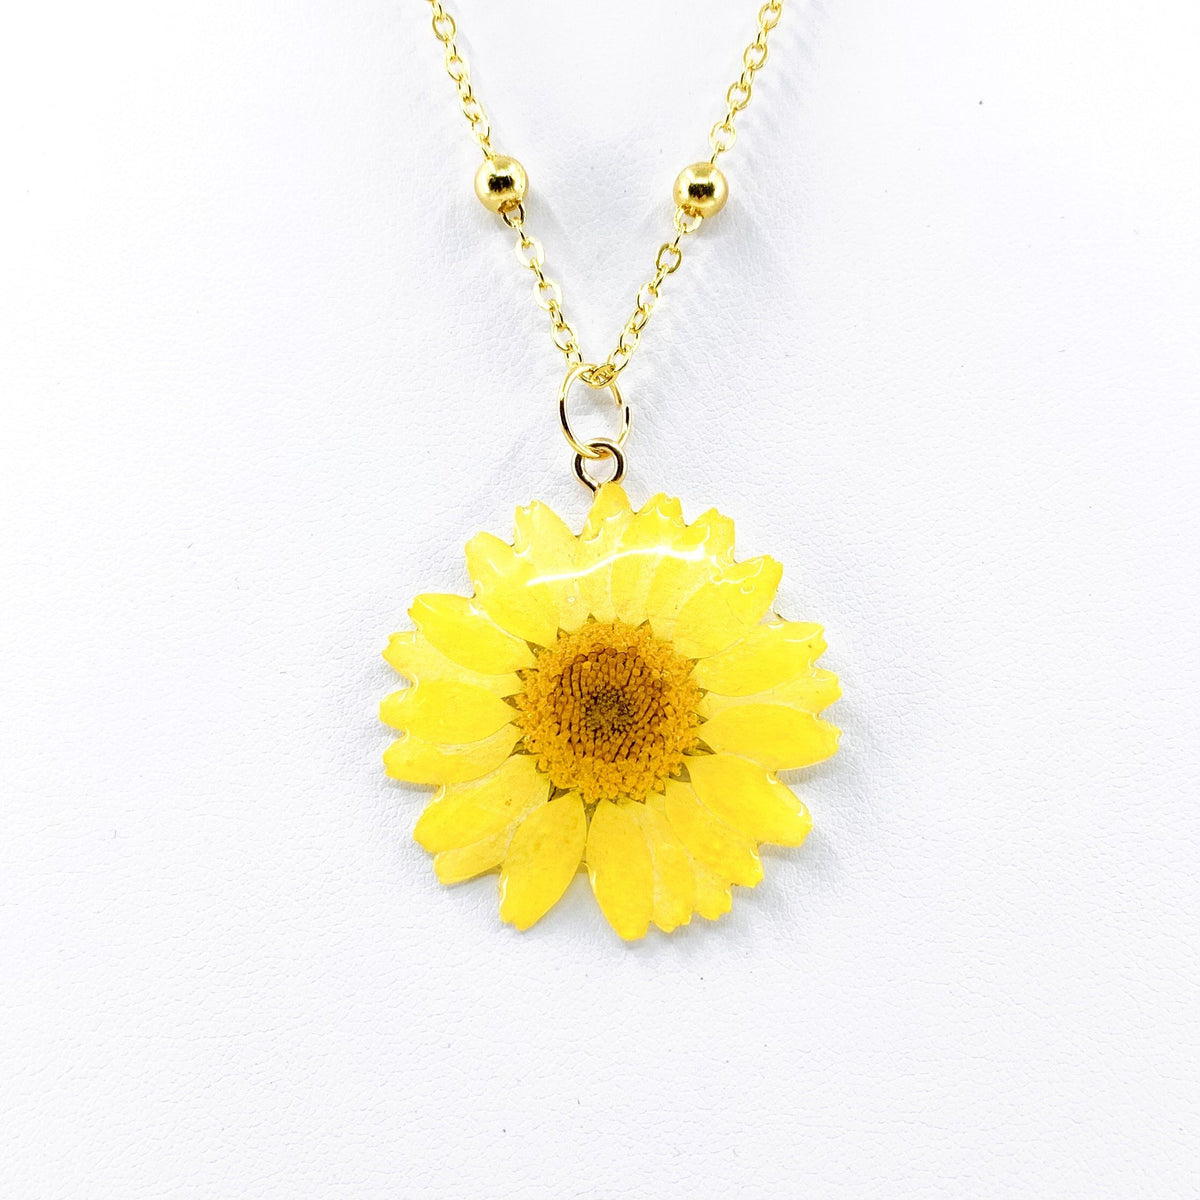 Pressed Flower Necklace Manufactured Overseas Yellow 